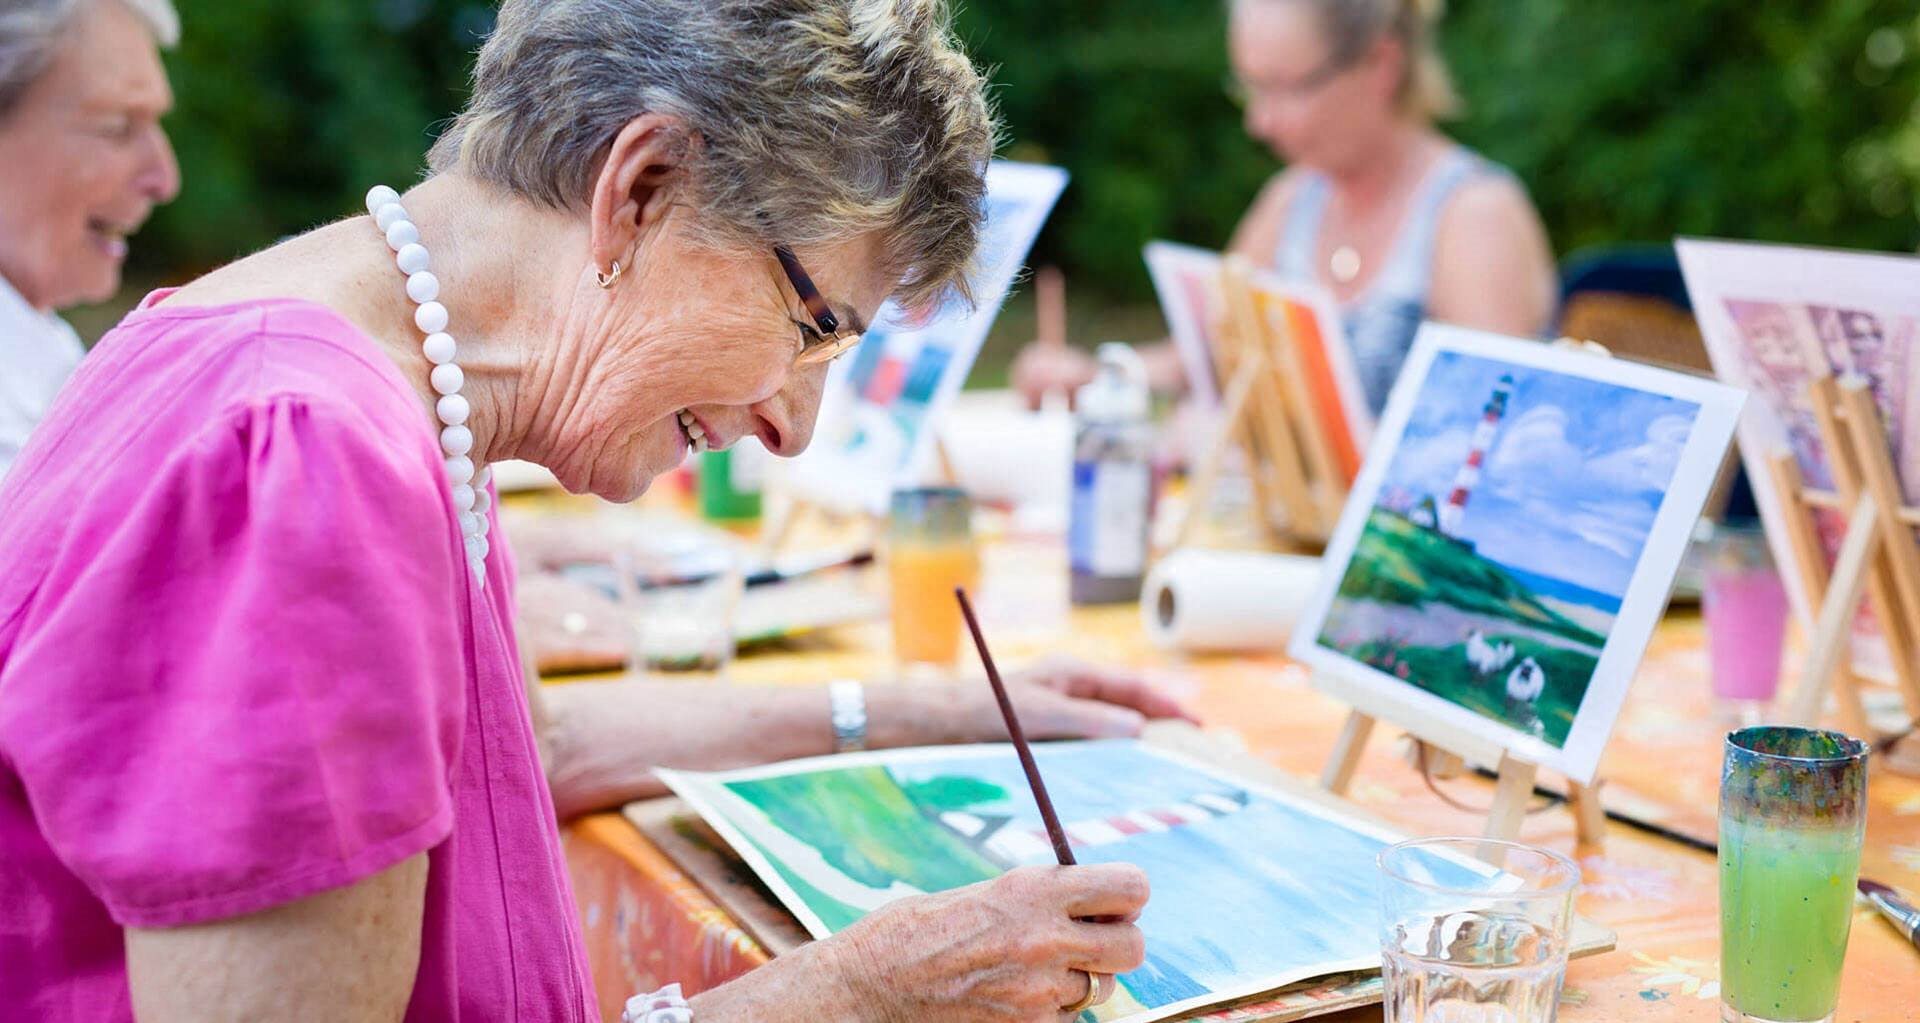 Painting Activity at Hibiscus Court, Melbourne, FL, 32901